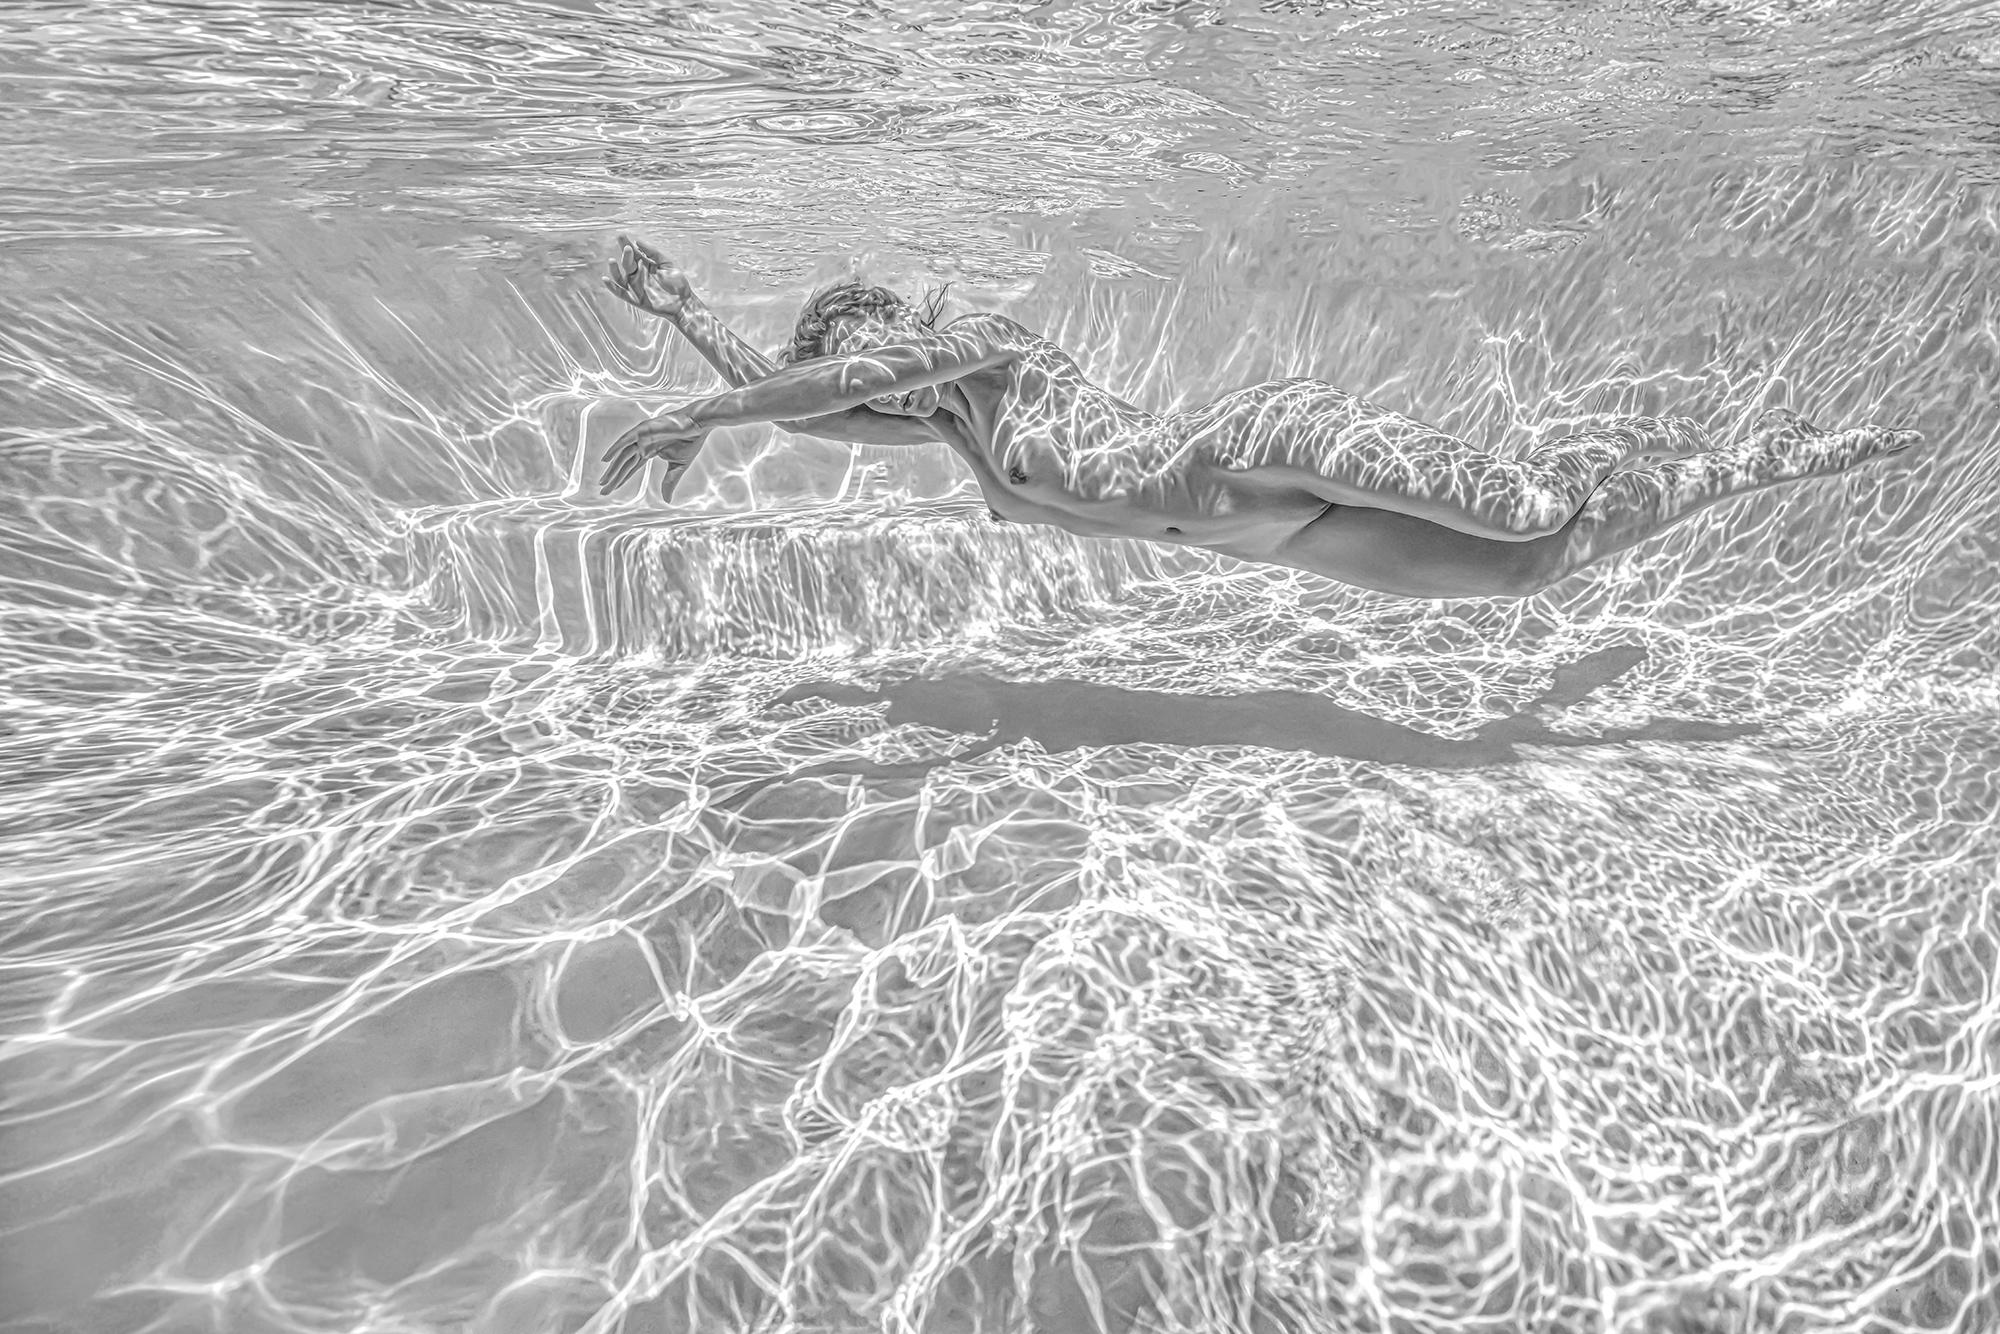 Alex Sher Nude Photograph - Thunderweb - underwater black & white nude photograph - print on paper 16" x 24"